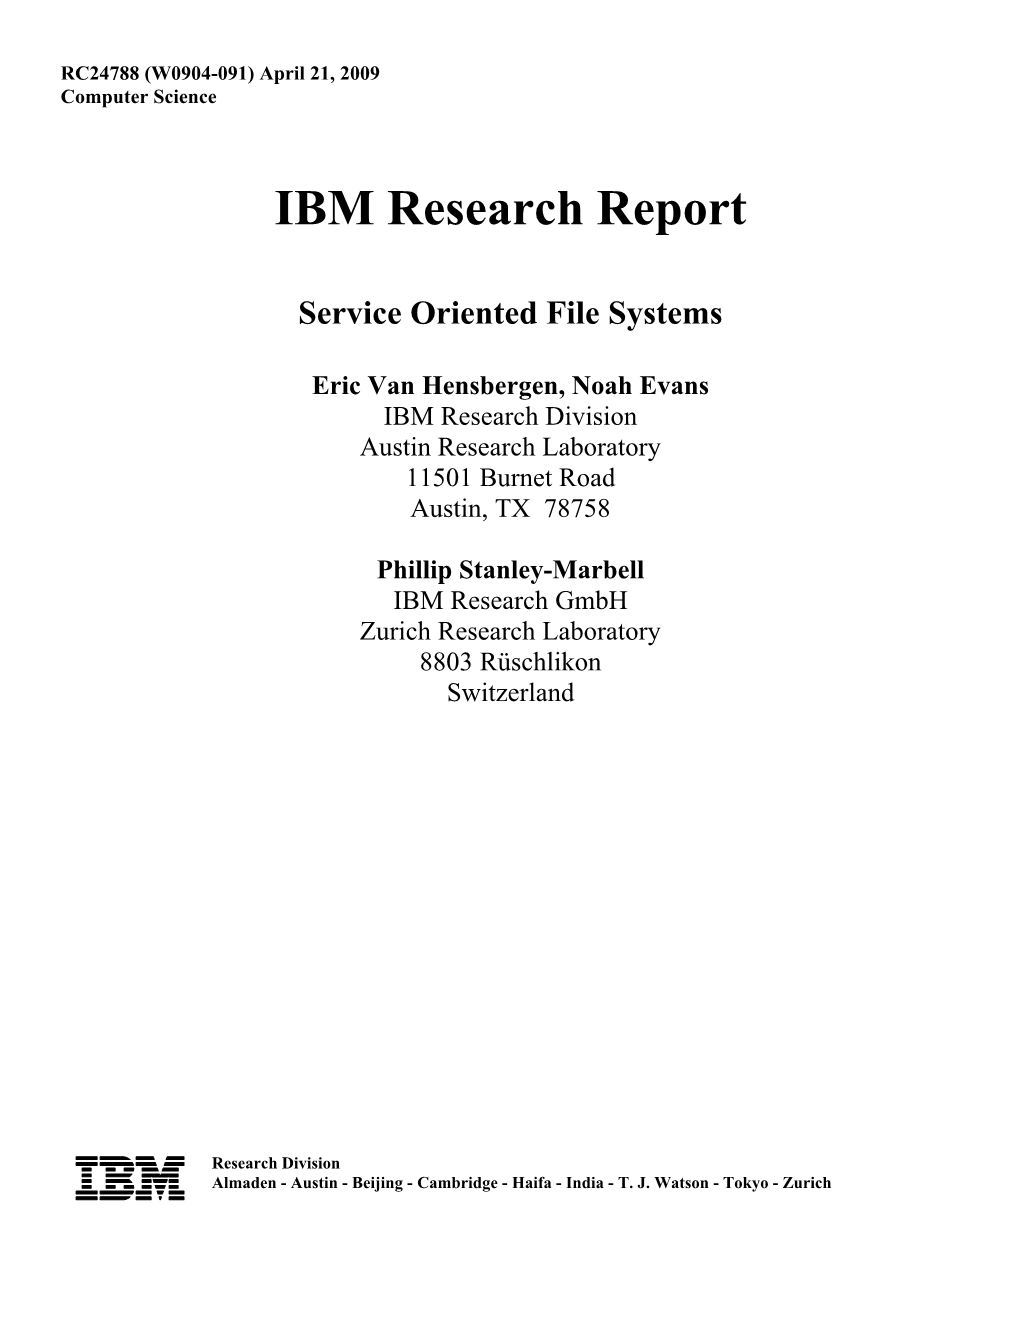 IBM Research Report Service Oriented File Systems Eric Van